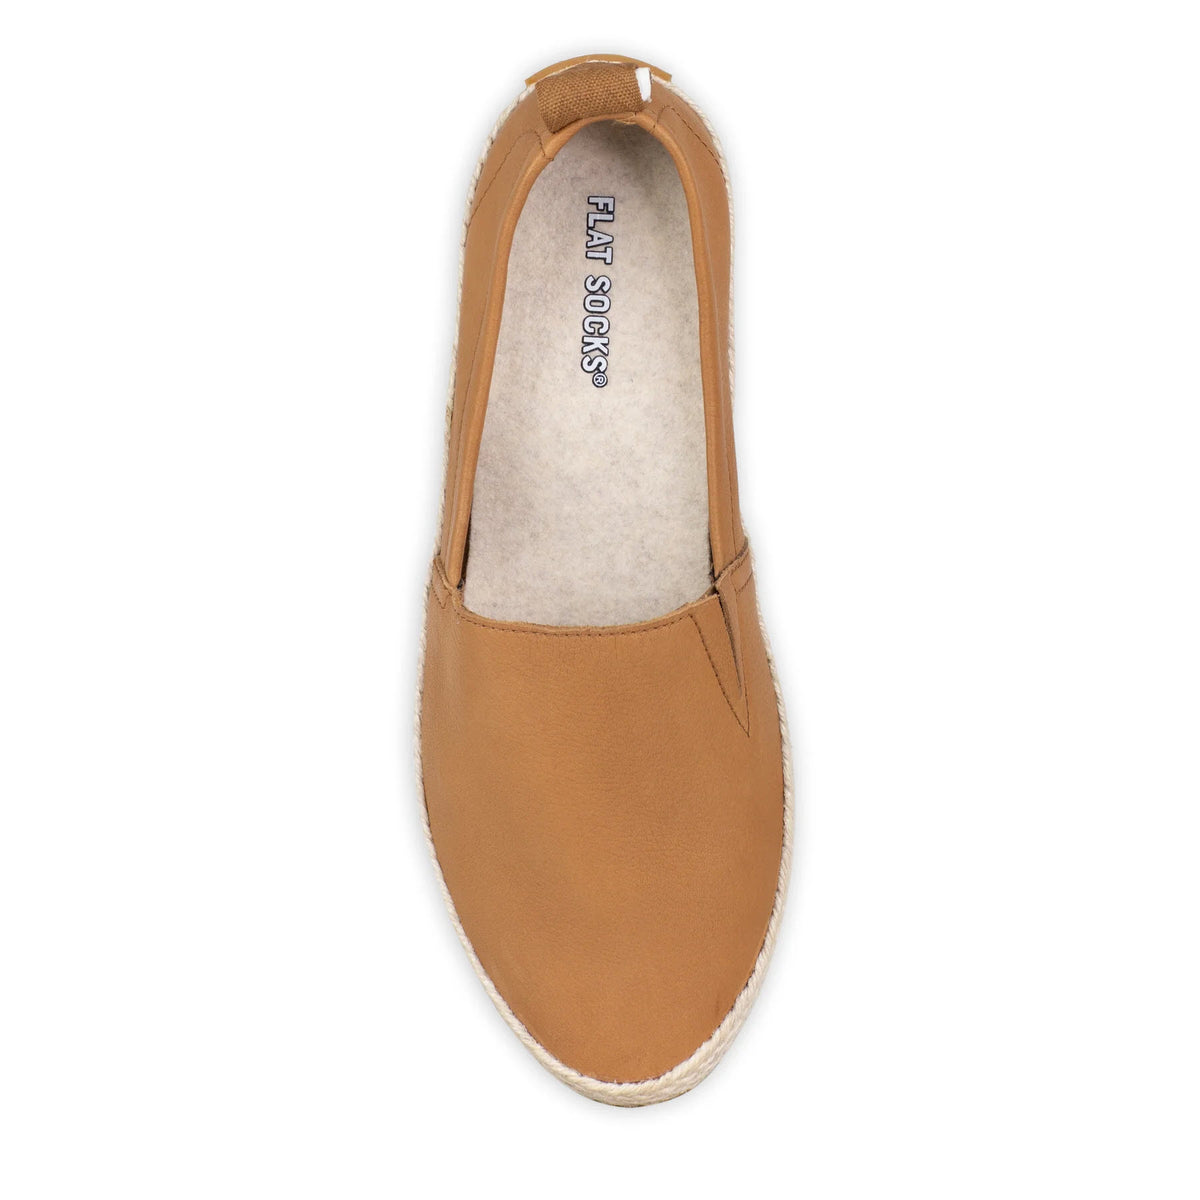 Top view of a single tan FLAT SOCKS slip-on shoe with a white soft wool lining and the label &quot;lea &amp; sons&quot; visible inside.